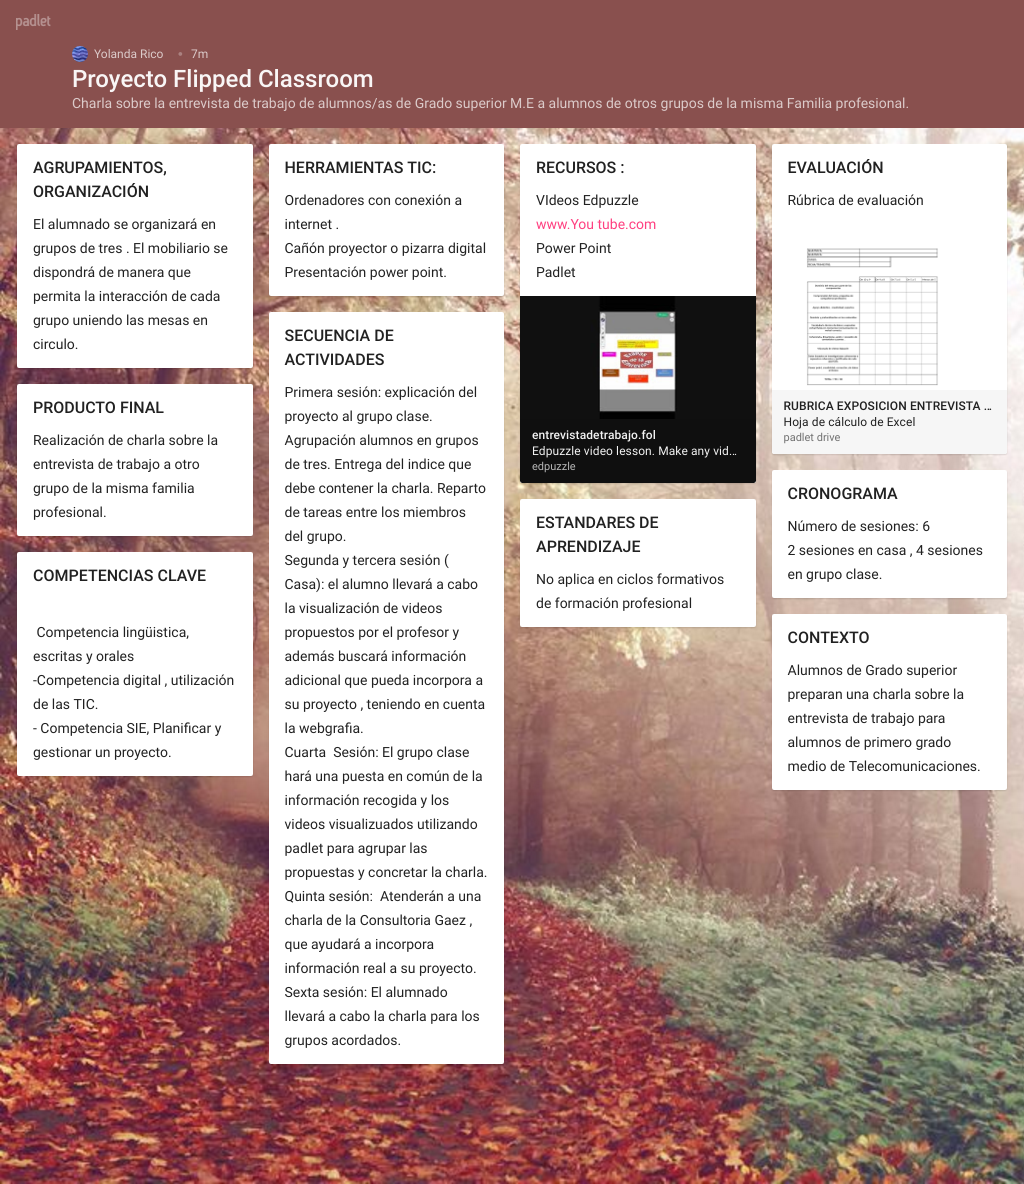 public://proyecto-flipped-classroom-fol_0.png